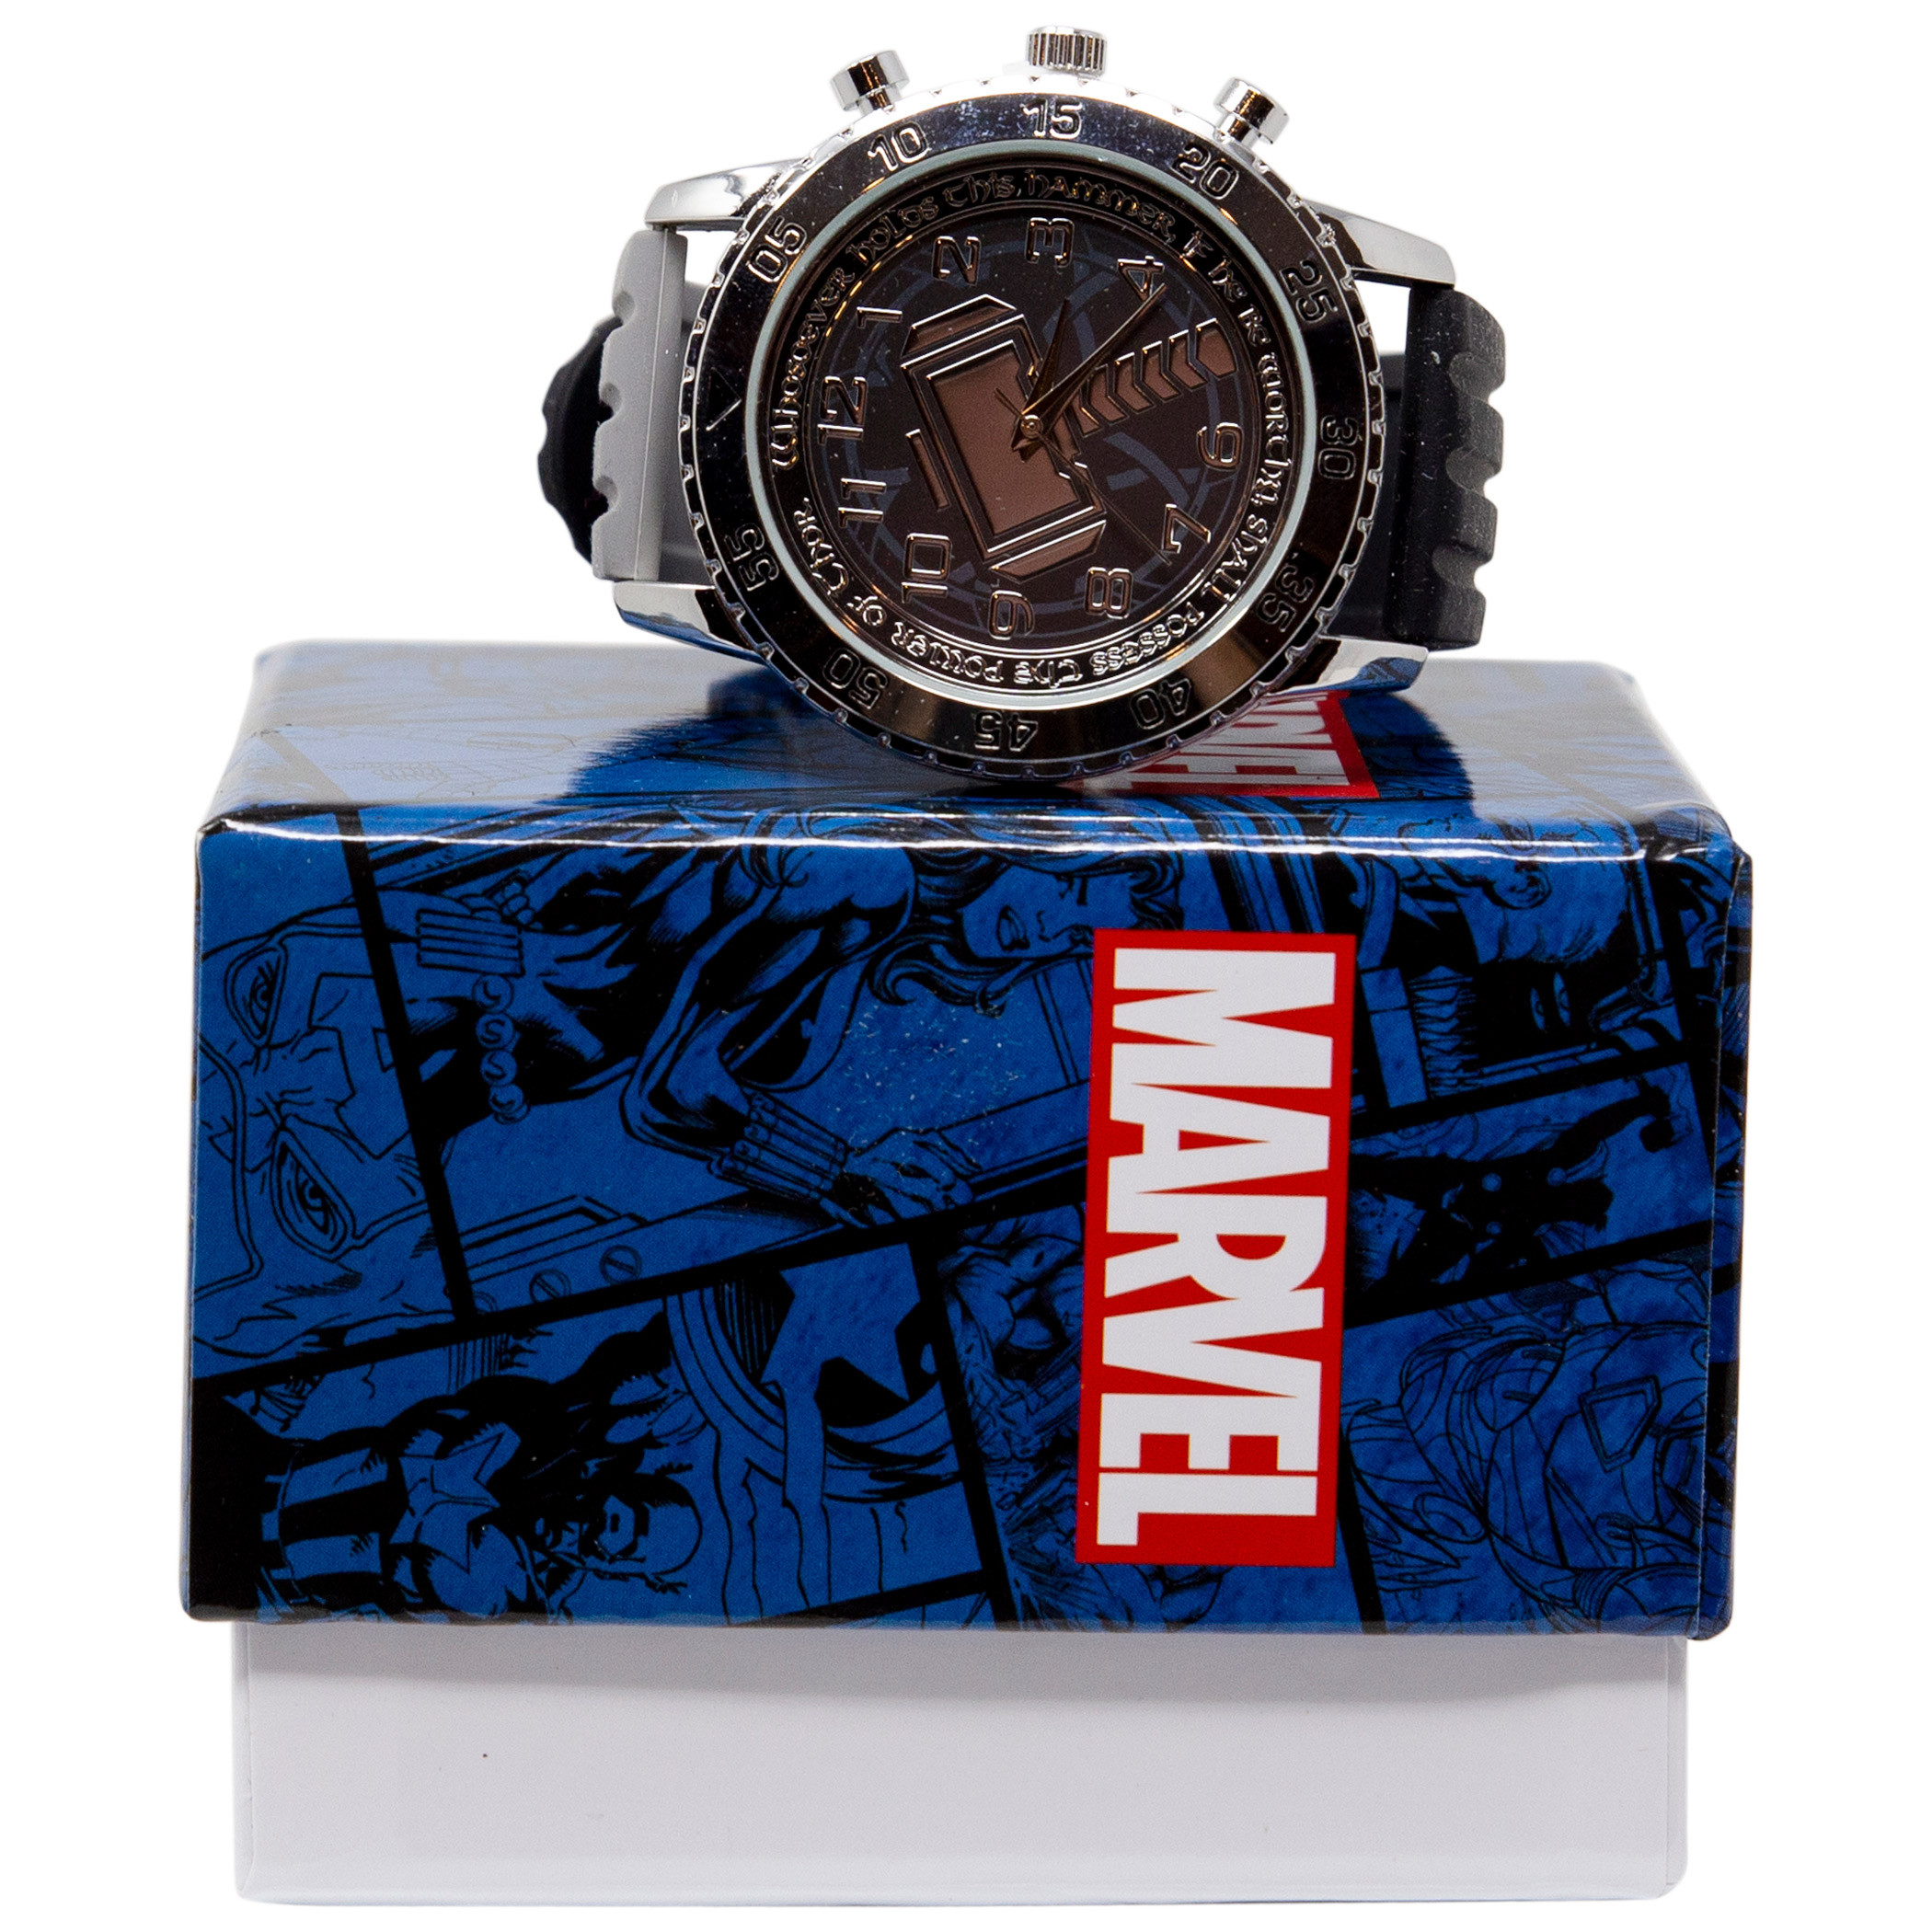 Thor's Mjlonir Classic Watch with Rubber Band